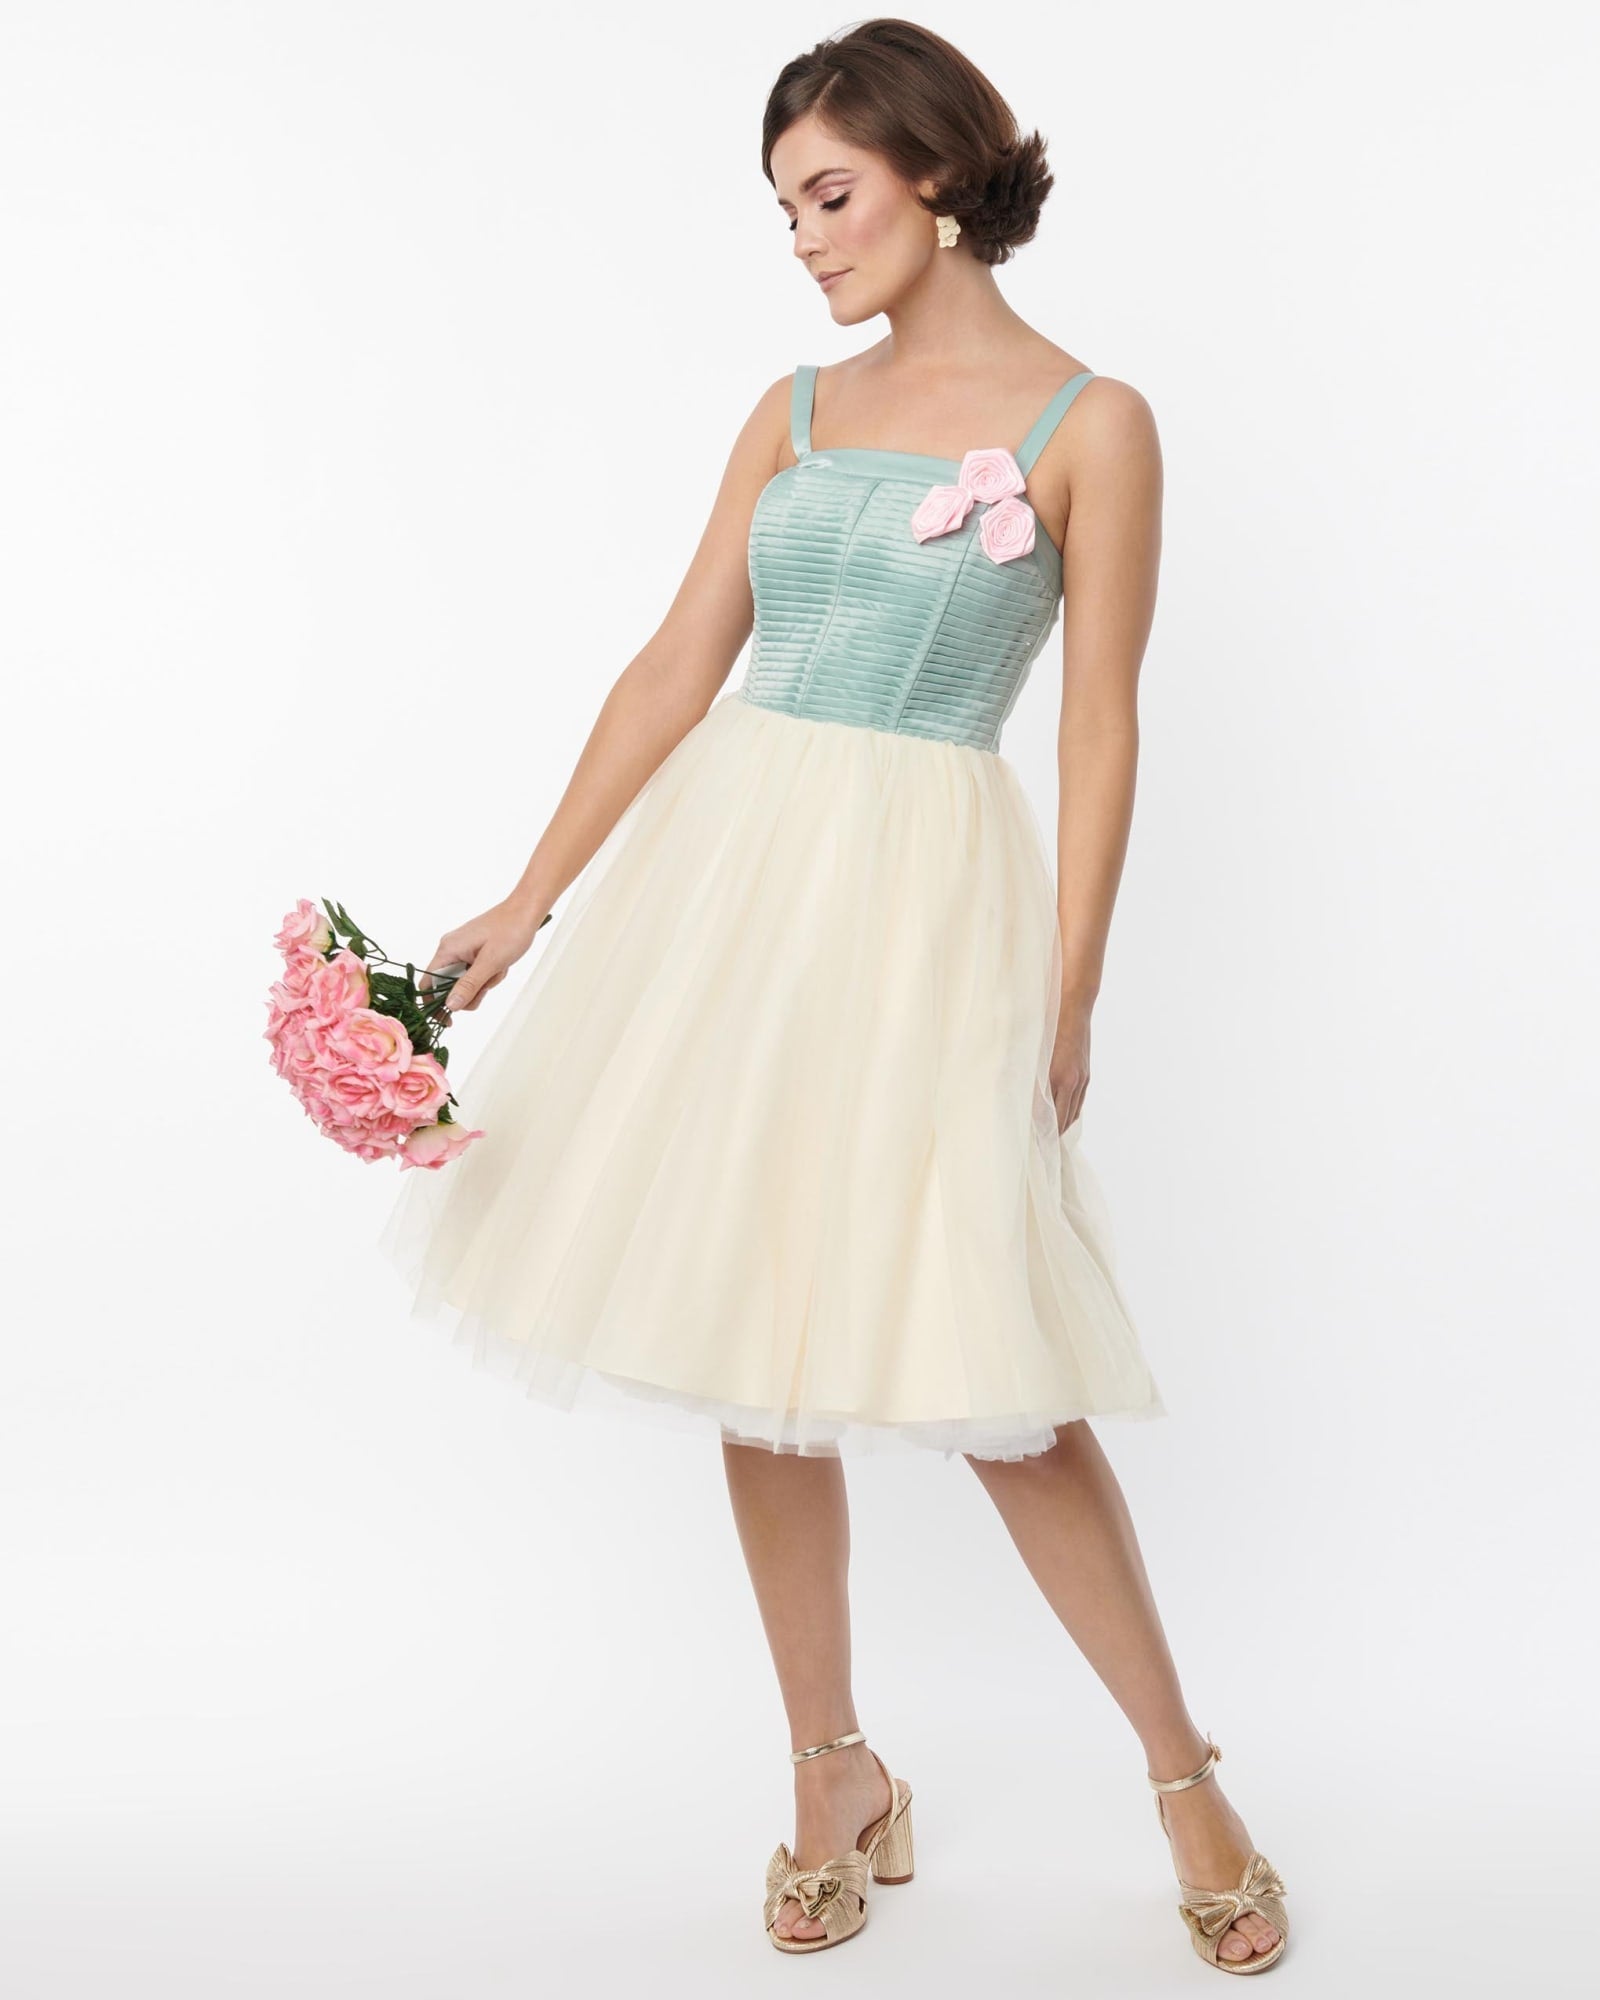 Unique Vintage Sage & Ivory Tulle Swing Dress | Green, White